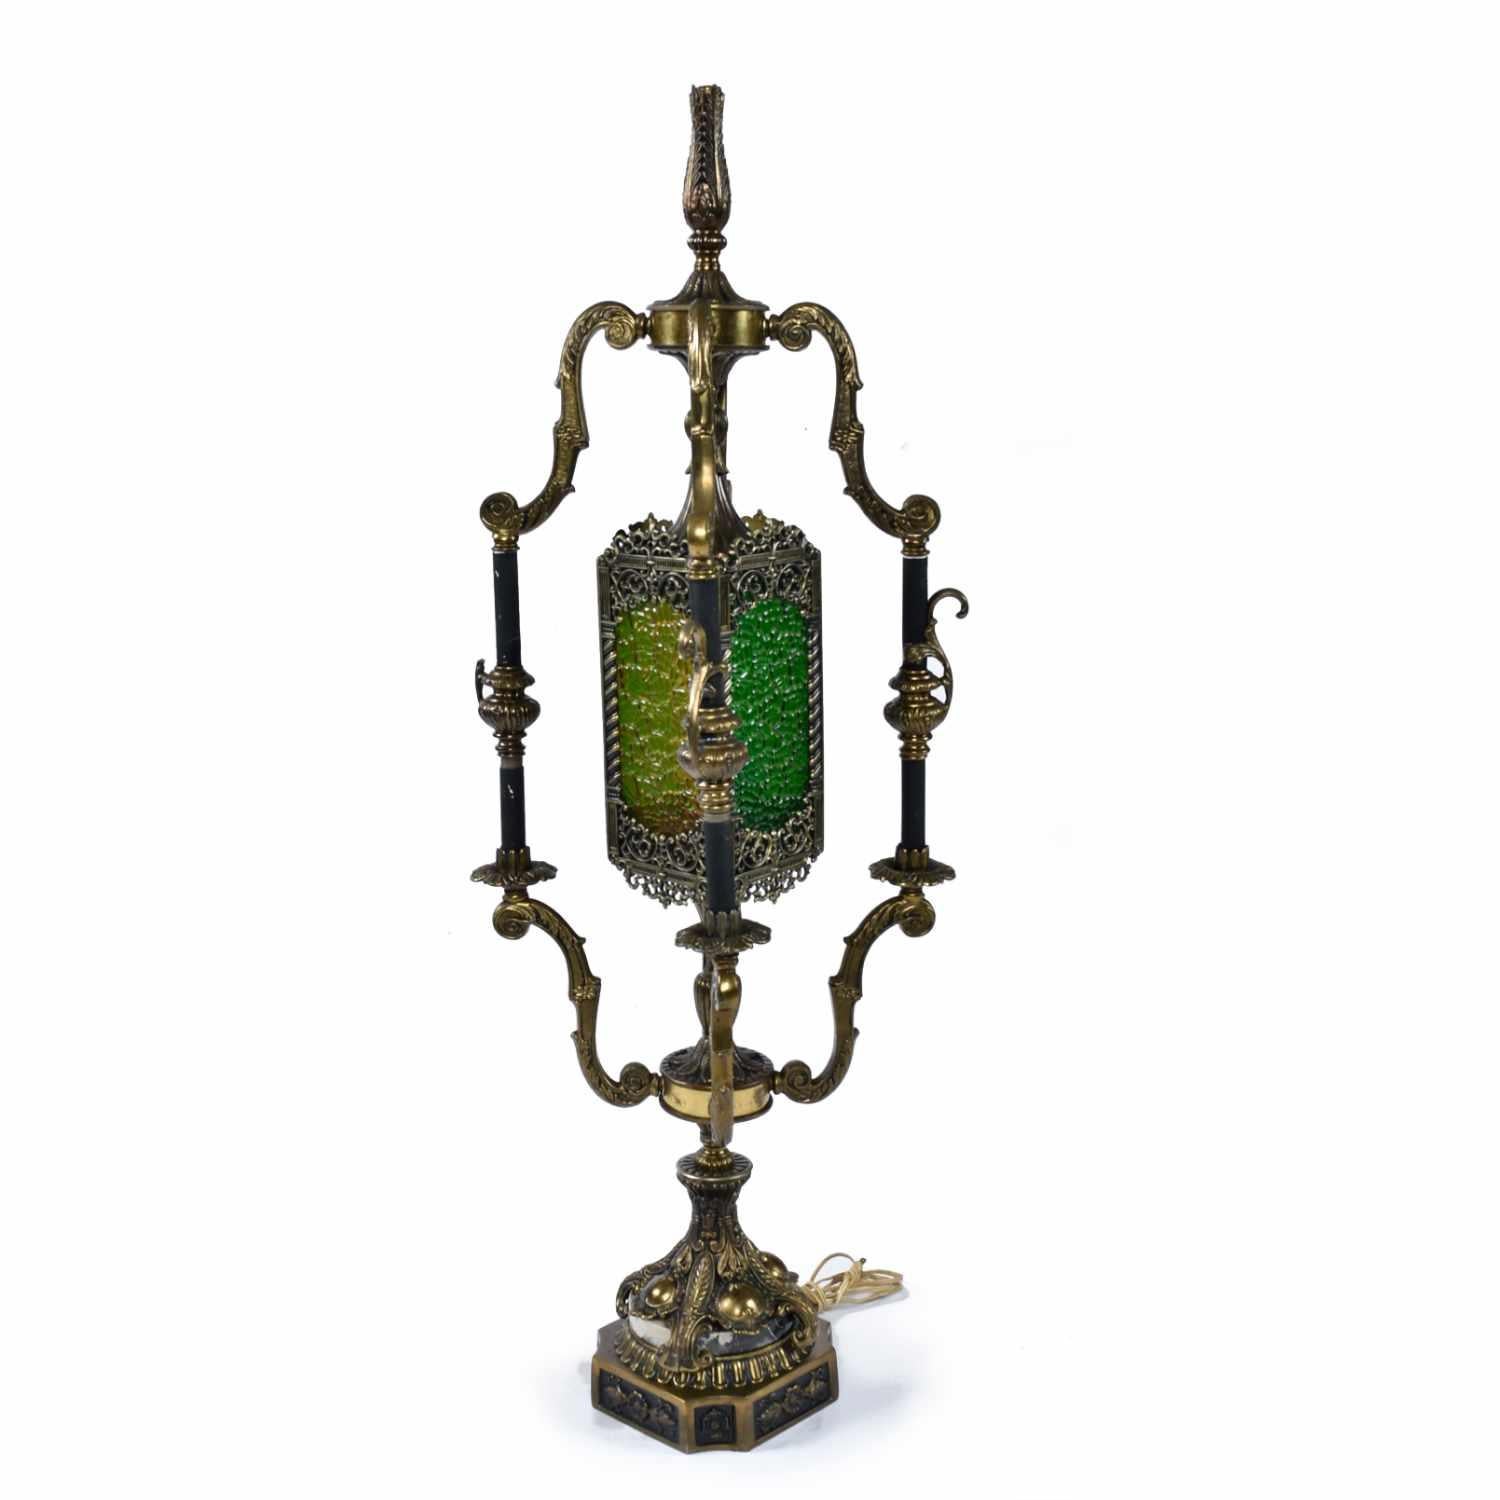 Vintage 1960s Mediterranean Gothic Revival table lamp. Fanciful scroll work, detailed embossed patterns, throughout and gold colored metal contrasting with black spires give a distinct Baroque feel. These elaborate embellishments along with the